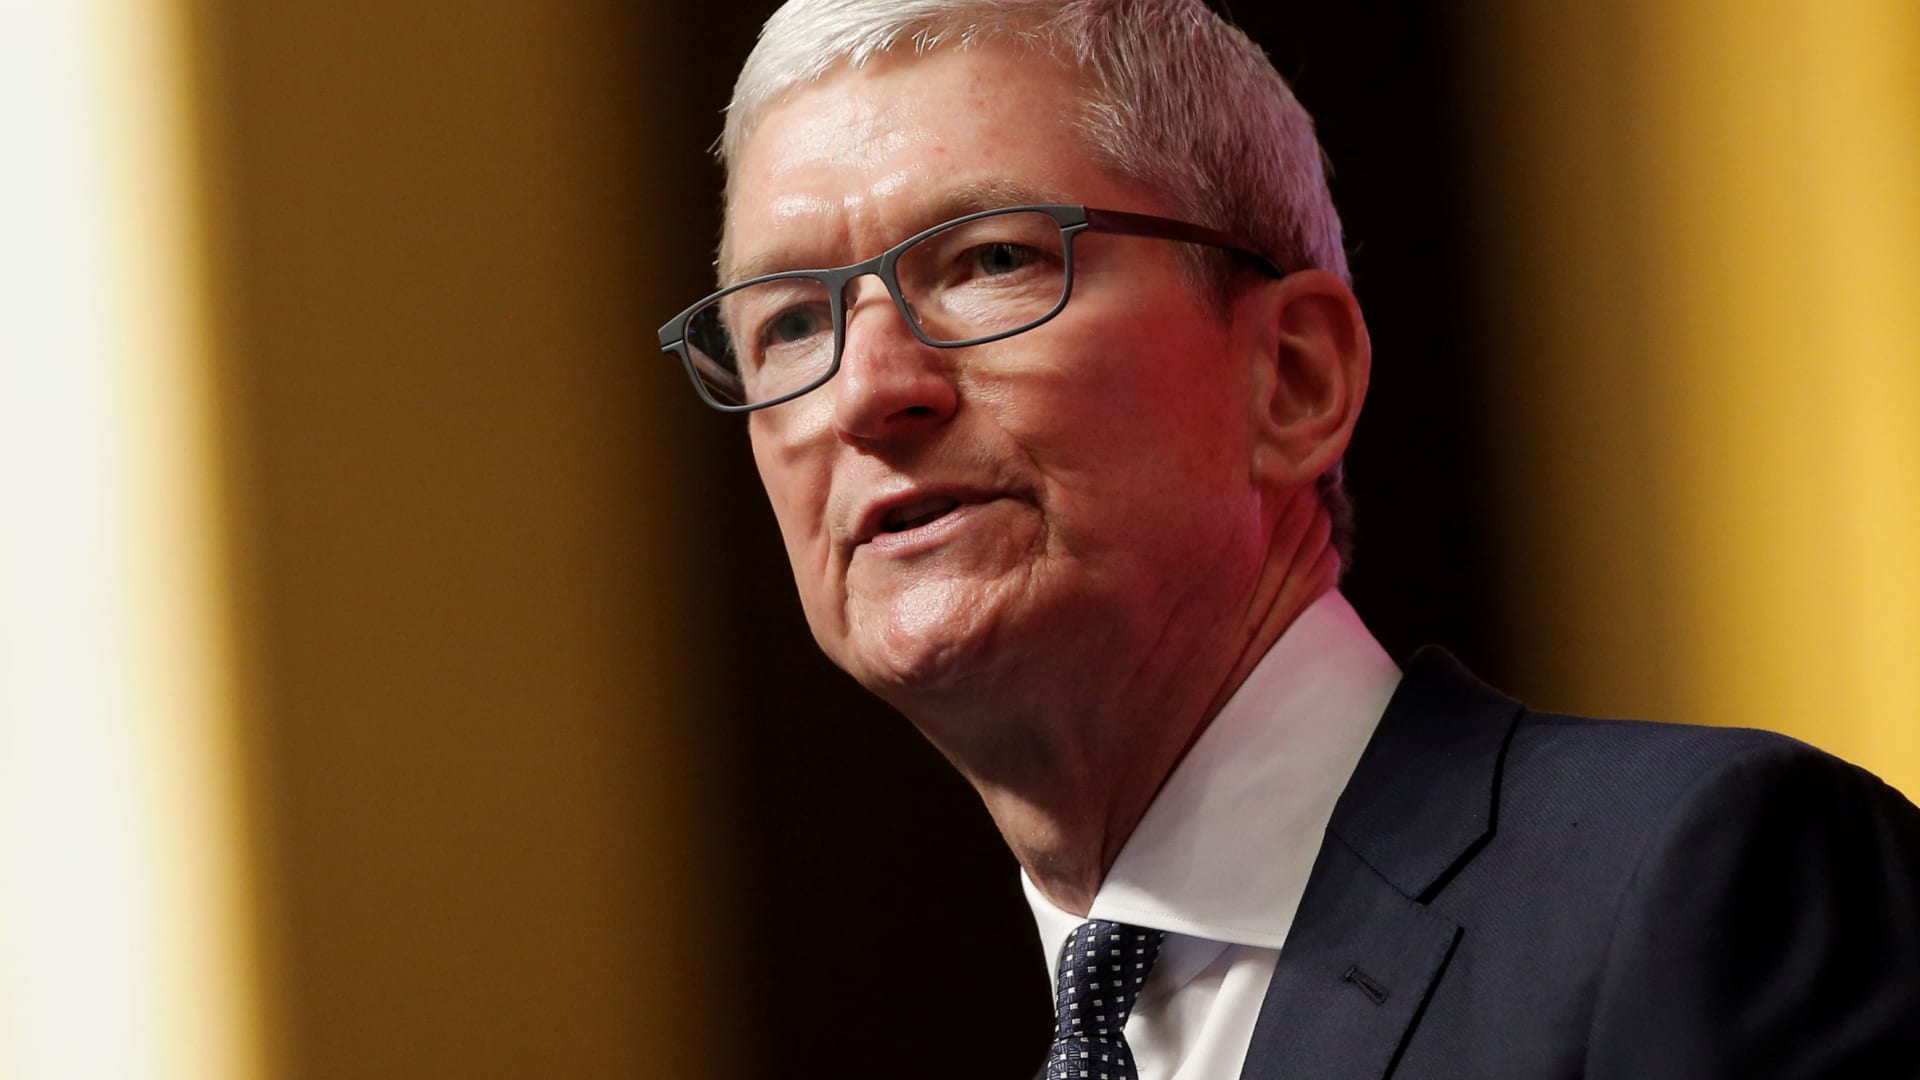 Apple CEO Tim Cook visits Shanghai amid a slowdown in China iPhone sales